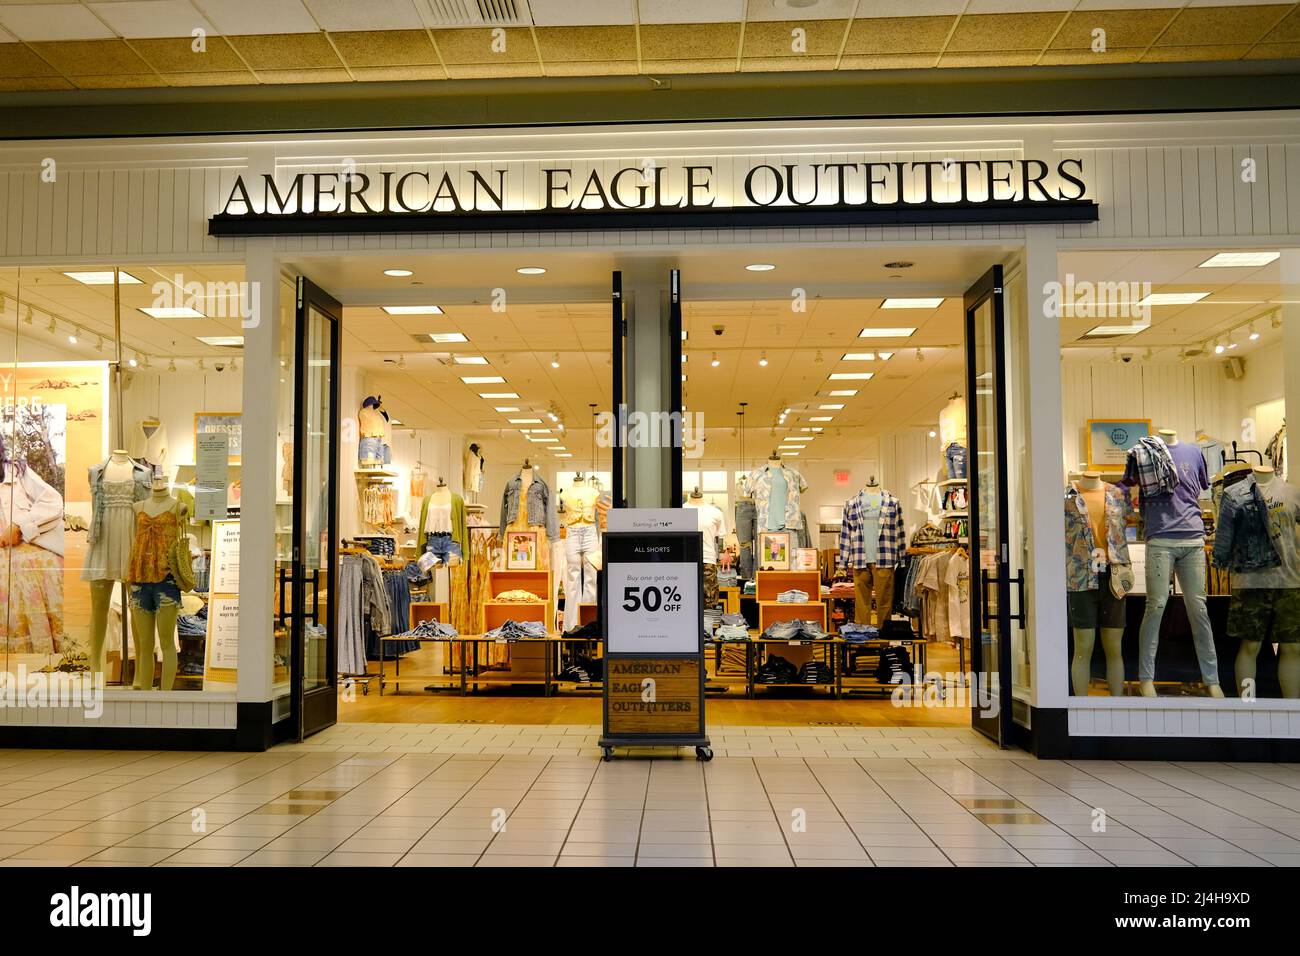 The entrance of an American Eagle Outfitters clothing store in the